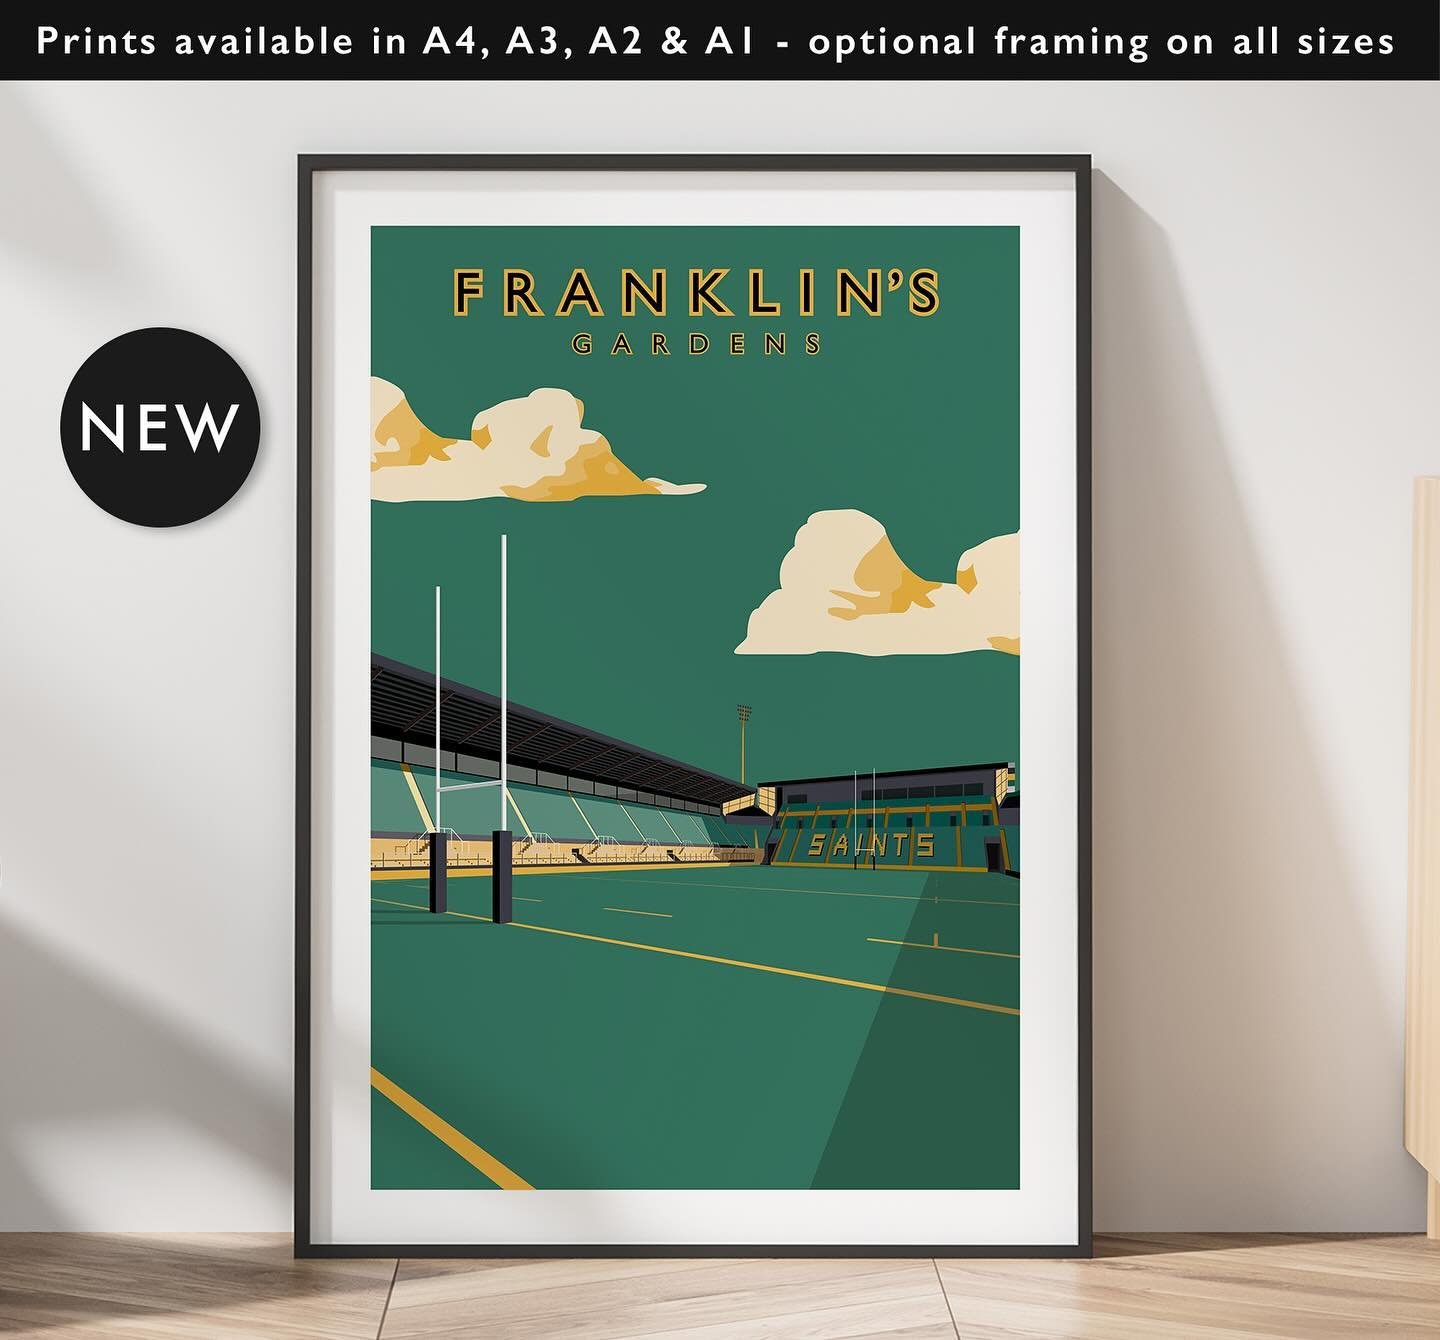 NEW: Franklins&rsquo;s Gardens - Black, Green &amp; Gold Edition

Get 10% off until midnight with the discount code: 
THE-SAINTS 

Shop now: matthewjiwood.com/rugby/franklin&hellip;

Prints available in A4, A3, A2 &amp; A1 with optional framing

#Nor